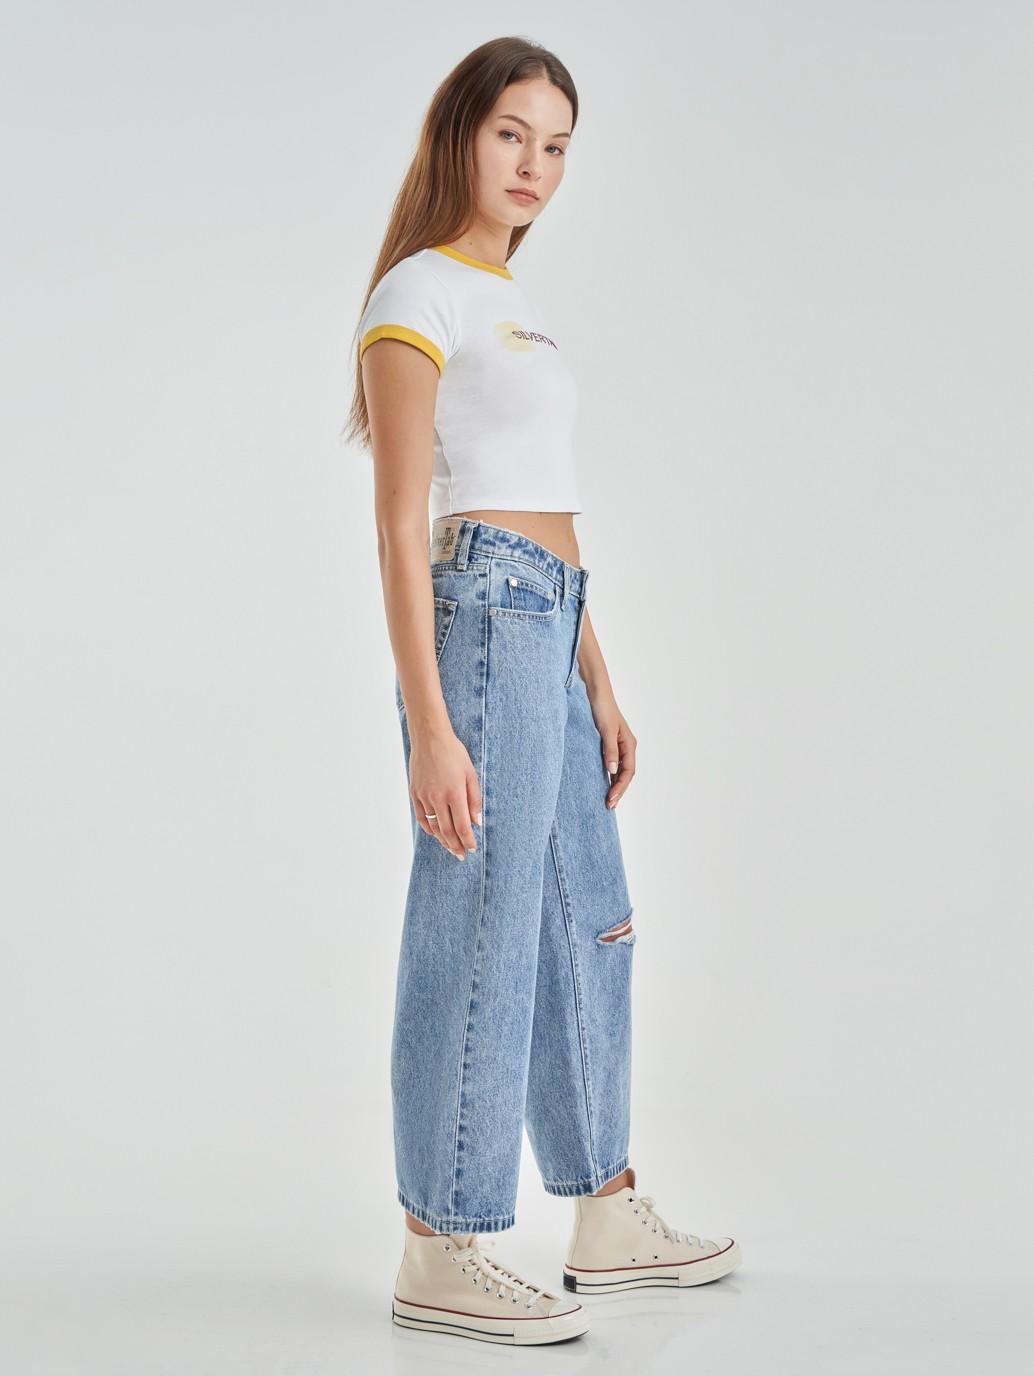 Buy Levi's® SilverTab™ Women's Low Baggy Cropped Jeans| Levi's